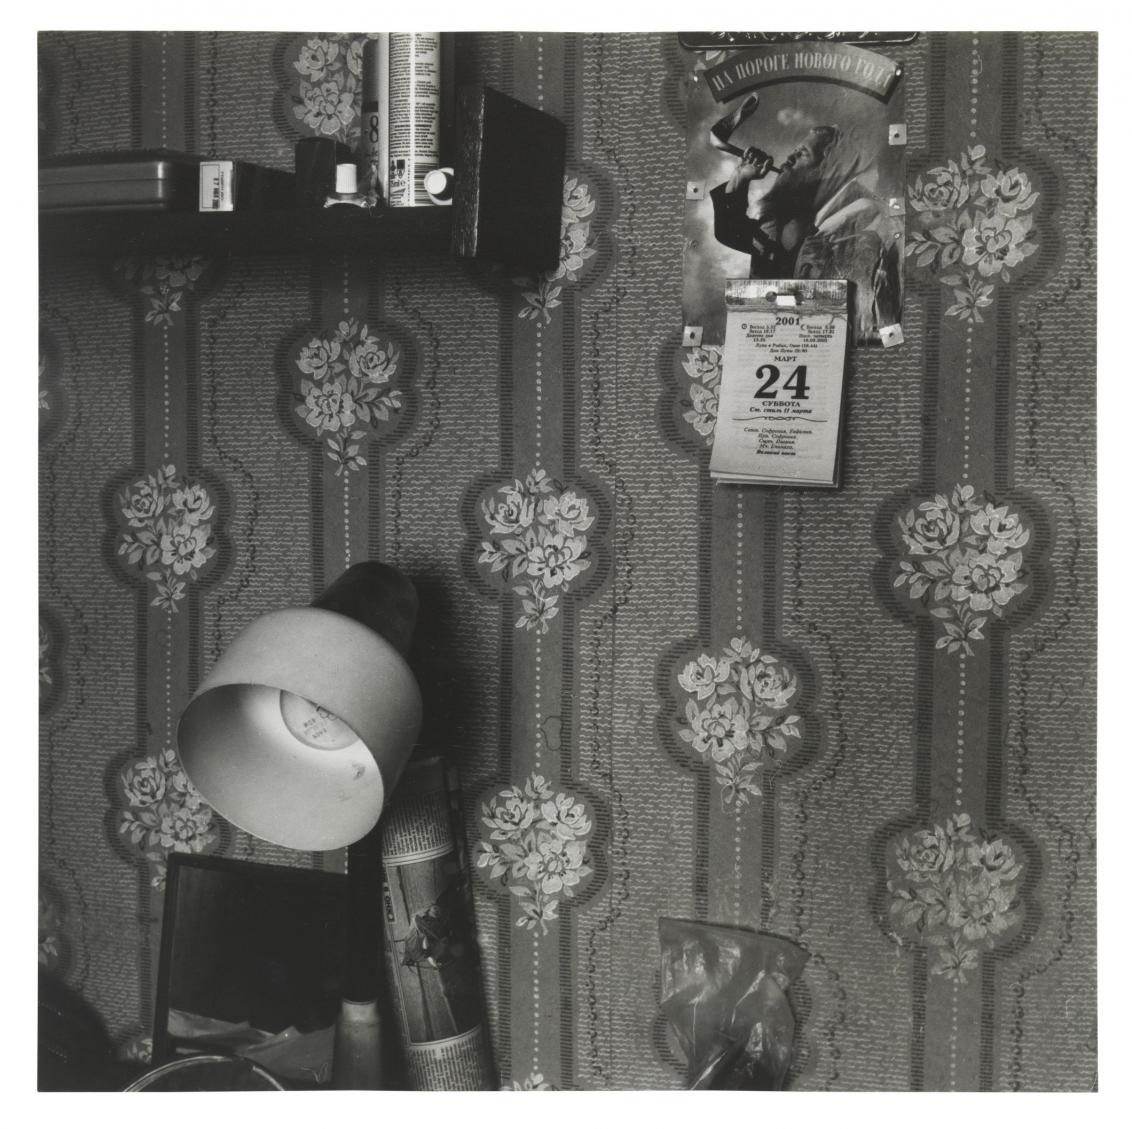 A photograph by artist Rita Ostrovska shows a wallpaper wall with calendar, in the foreground is a floor lamp.